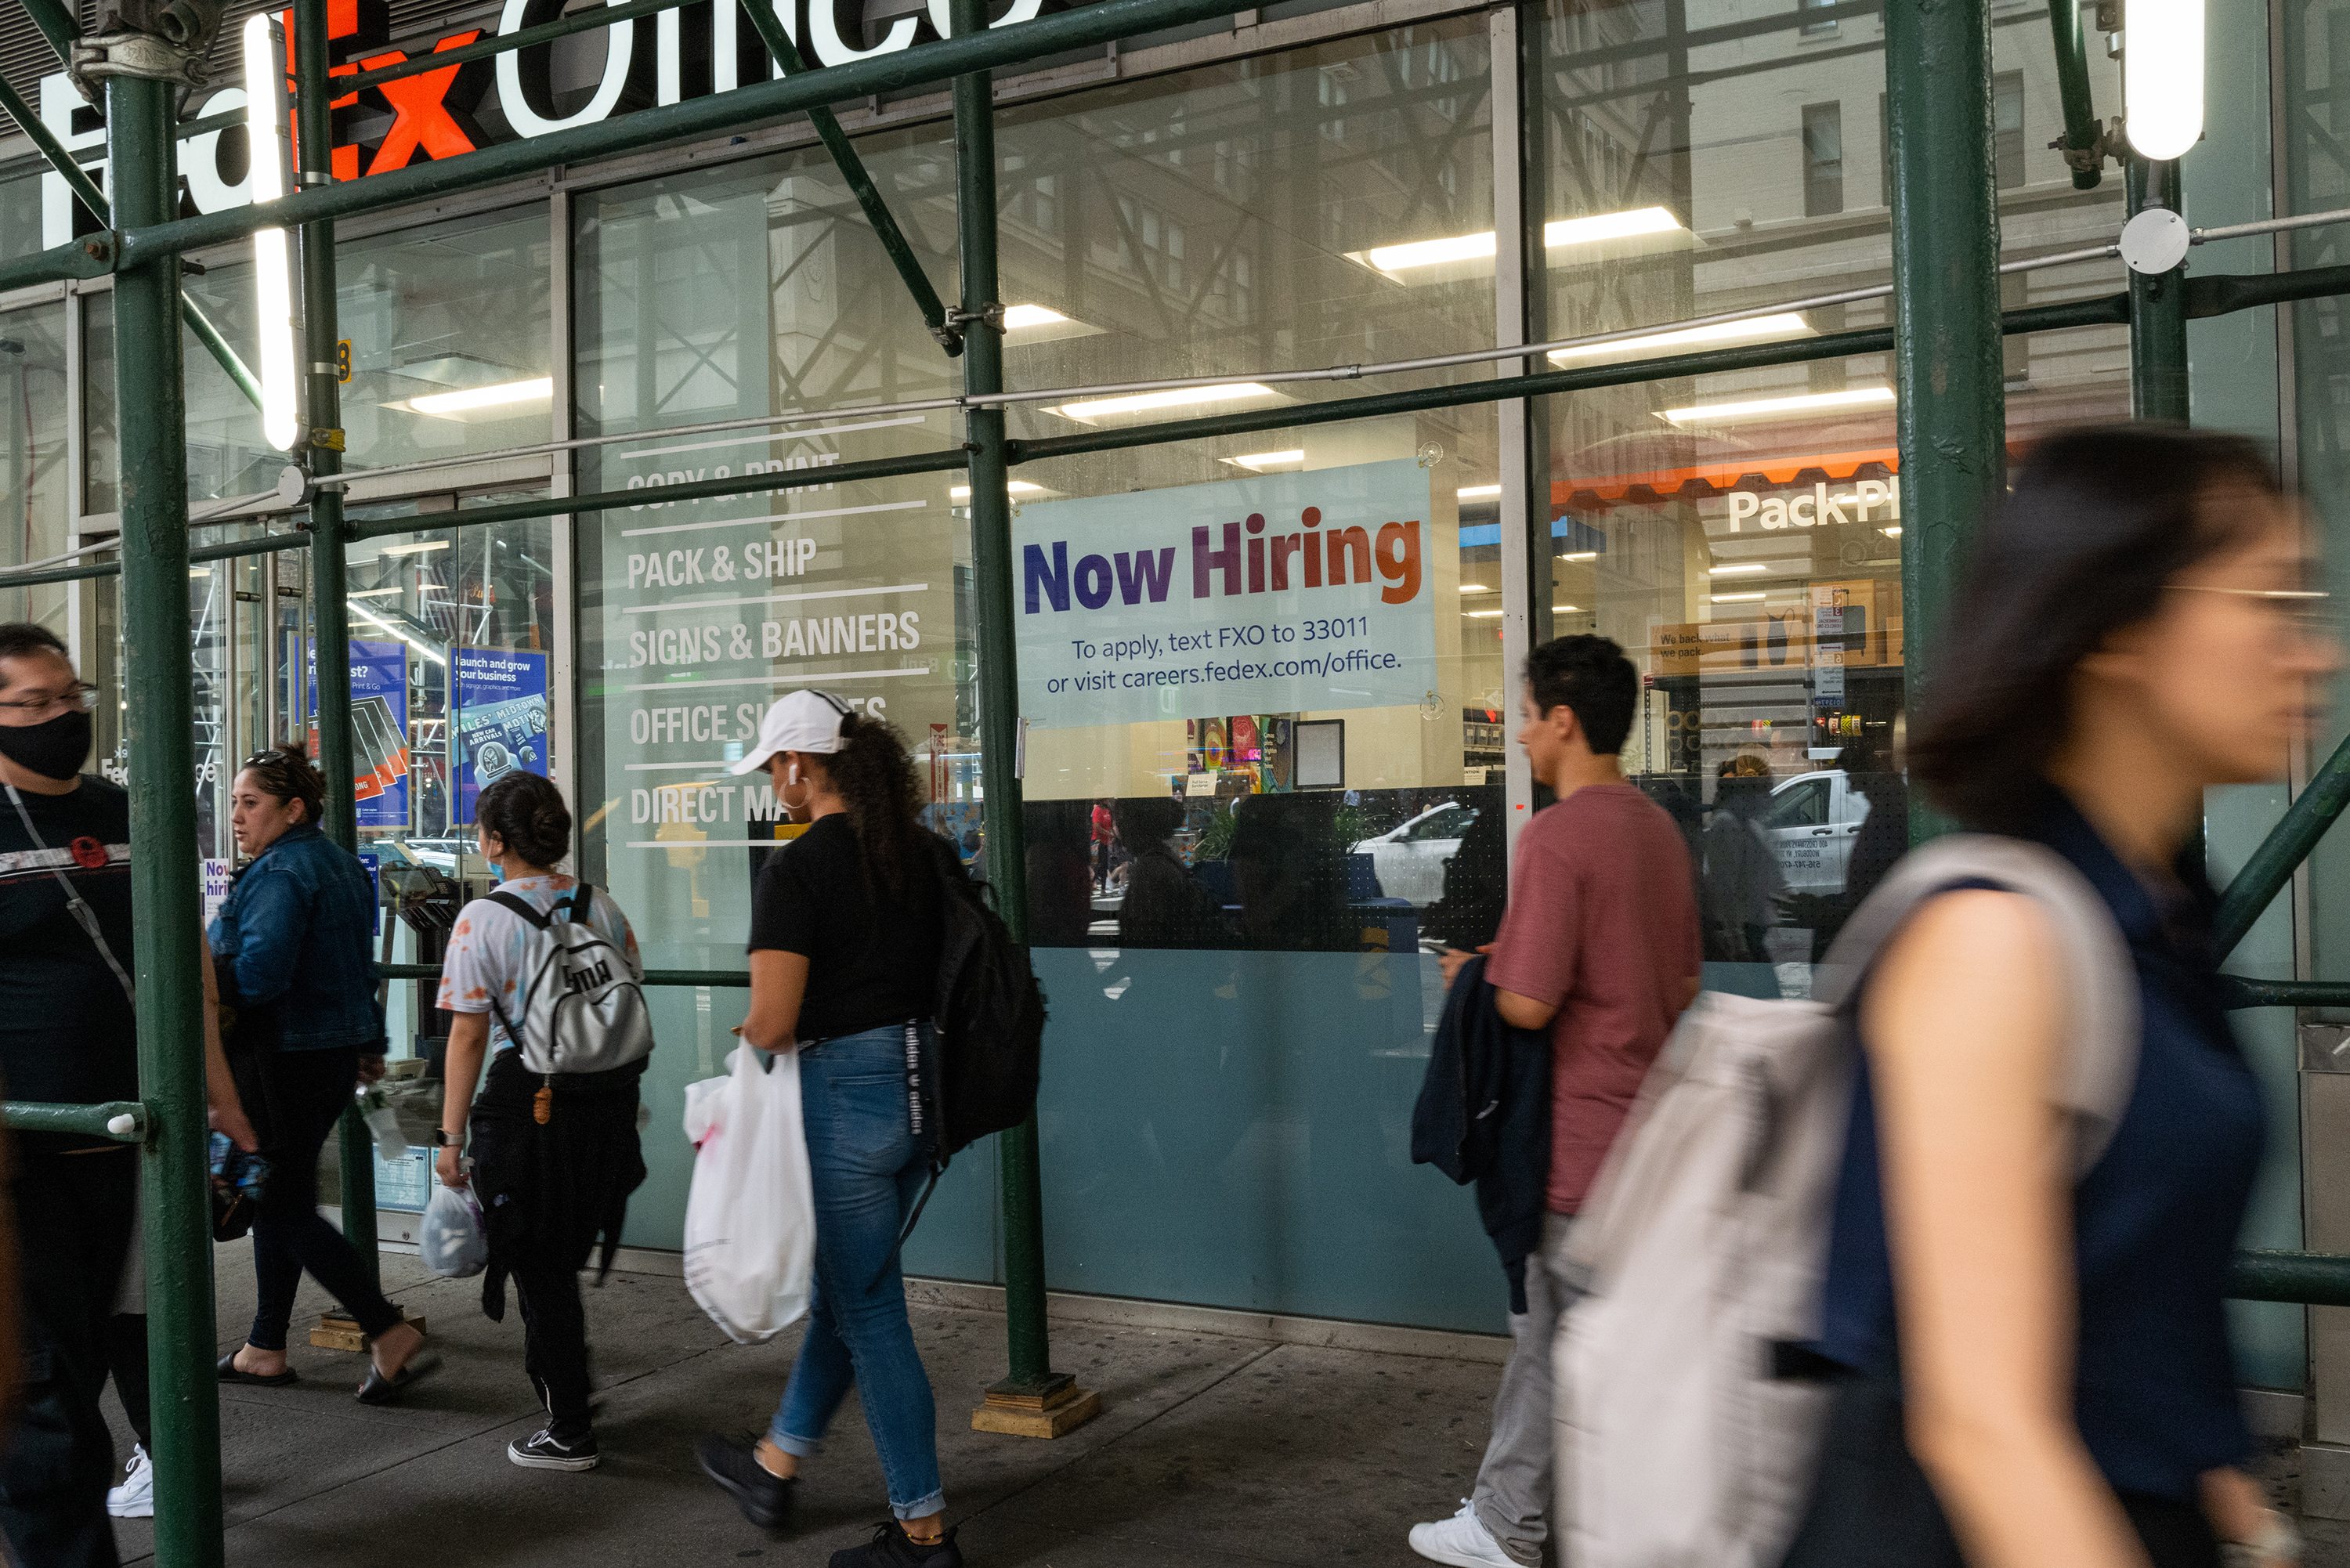 A "now hiring" sign is displayed in a window in Manhattan on July 28 in New York City.